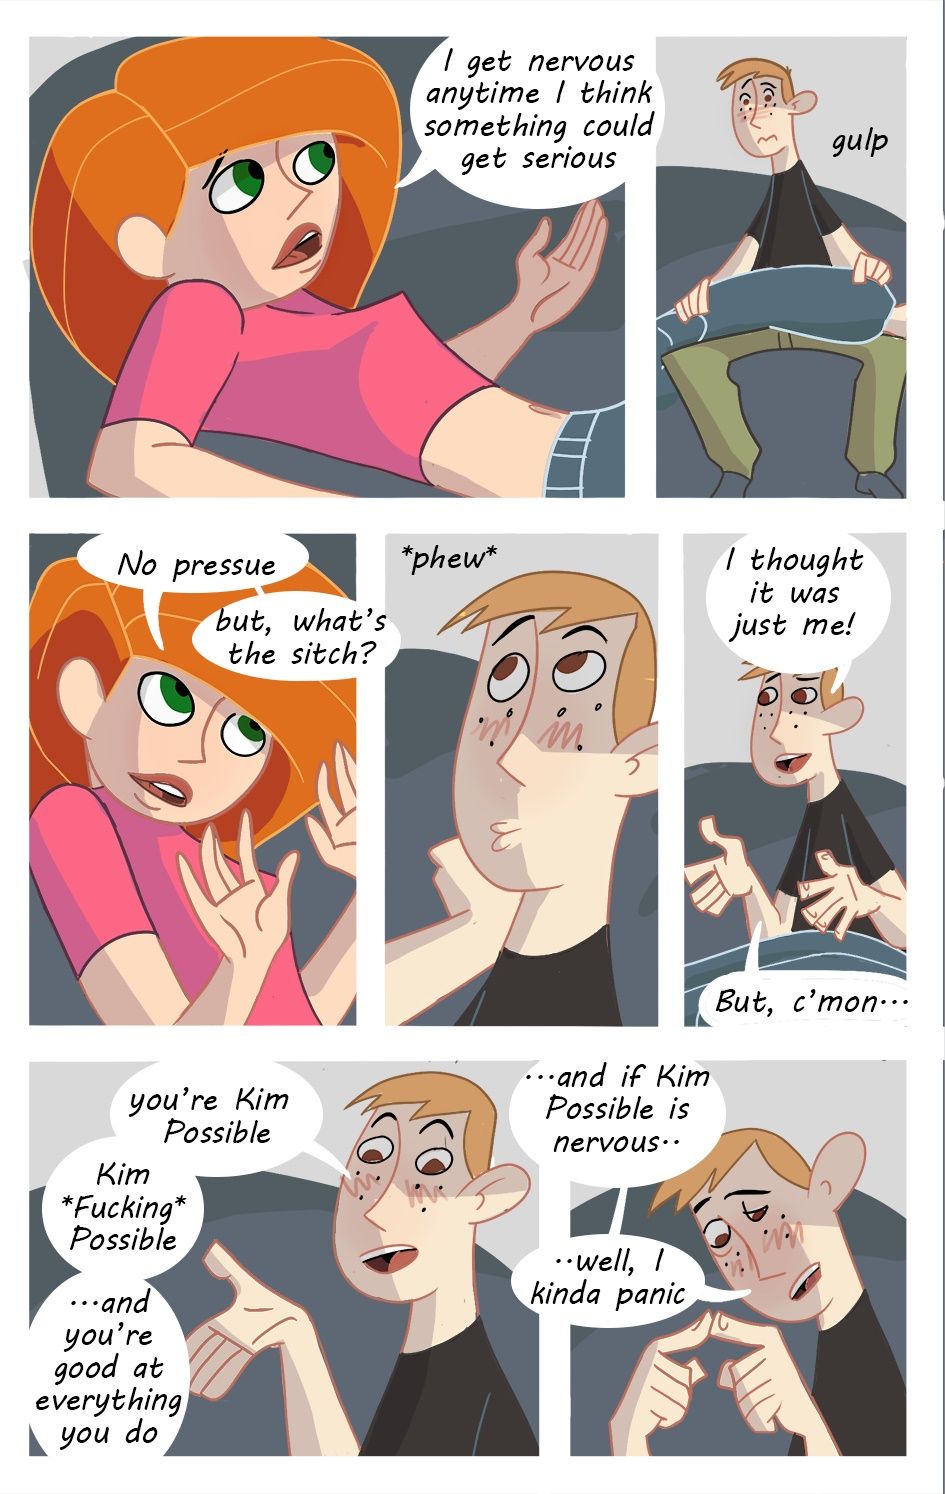 [Uanonkp] The Couch (Kim Possible) 3